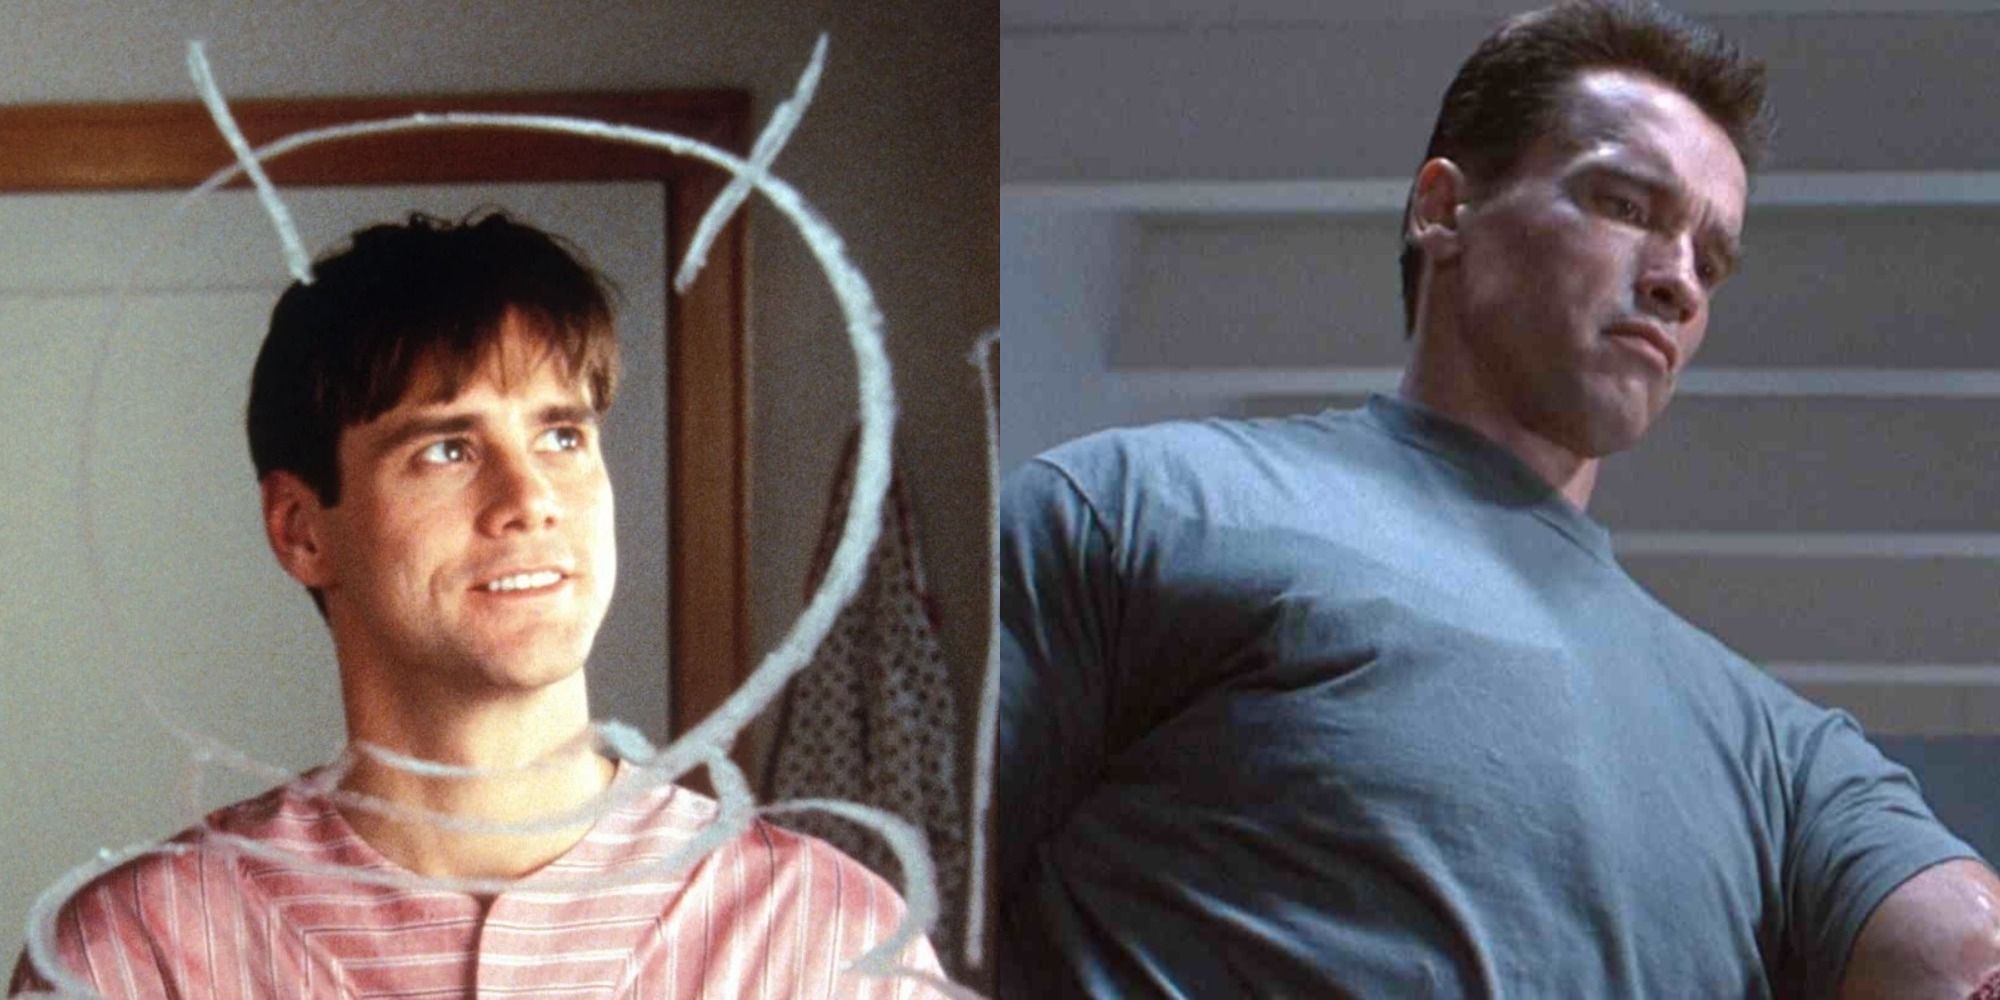 Split image of The Truman Show and Terminator 2: Judgement Day